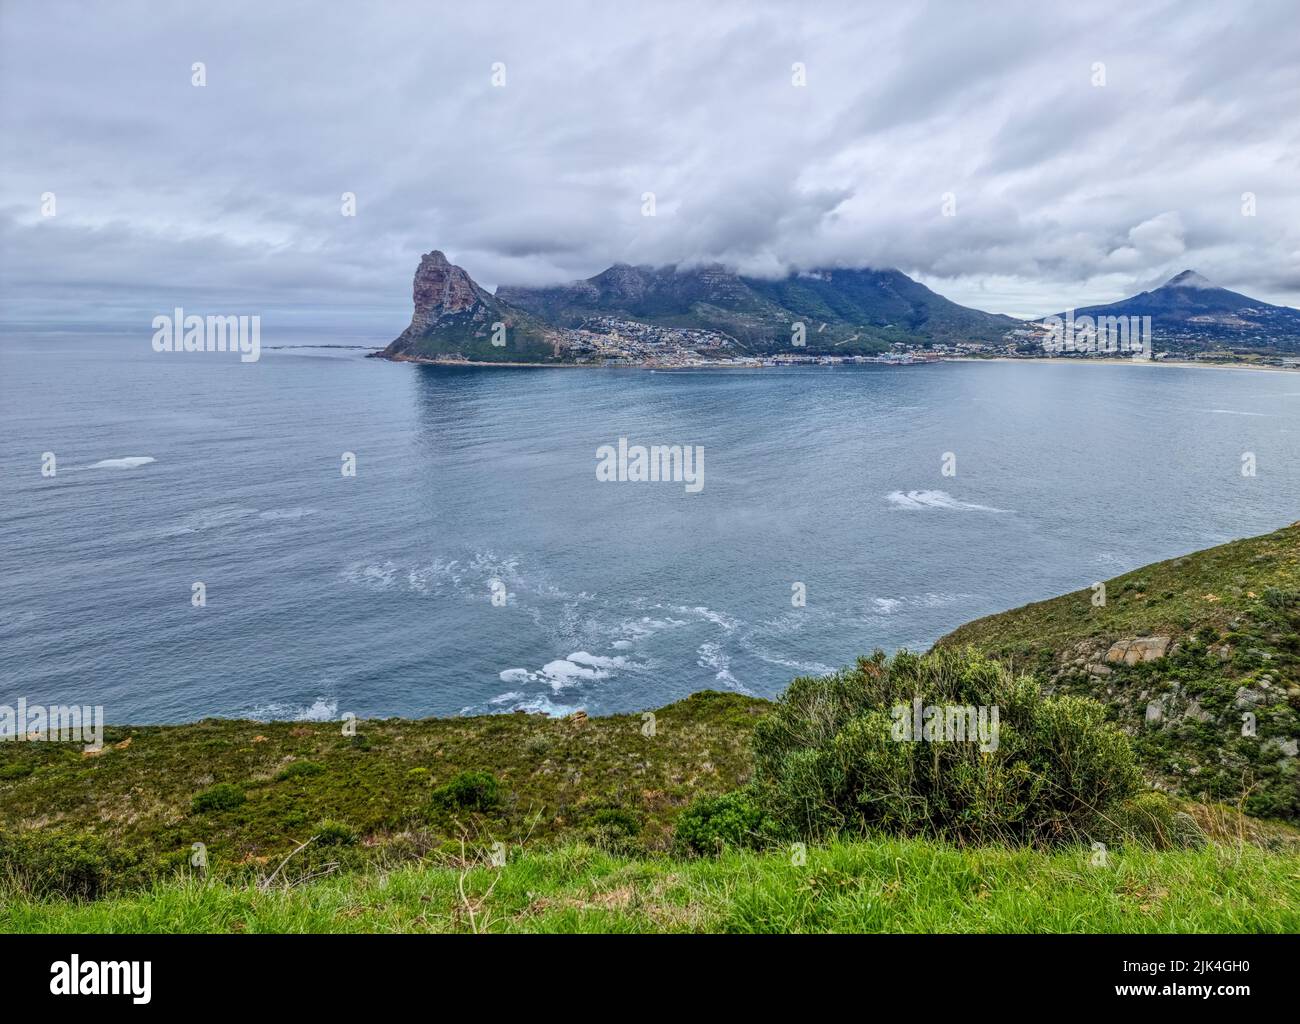 Hout bay mountain and beach along Chapman's peak drive cape town South Africa Stock Photo